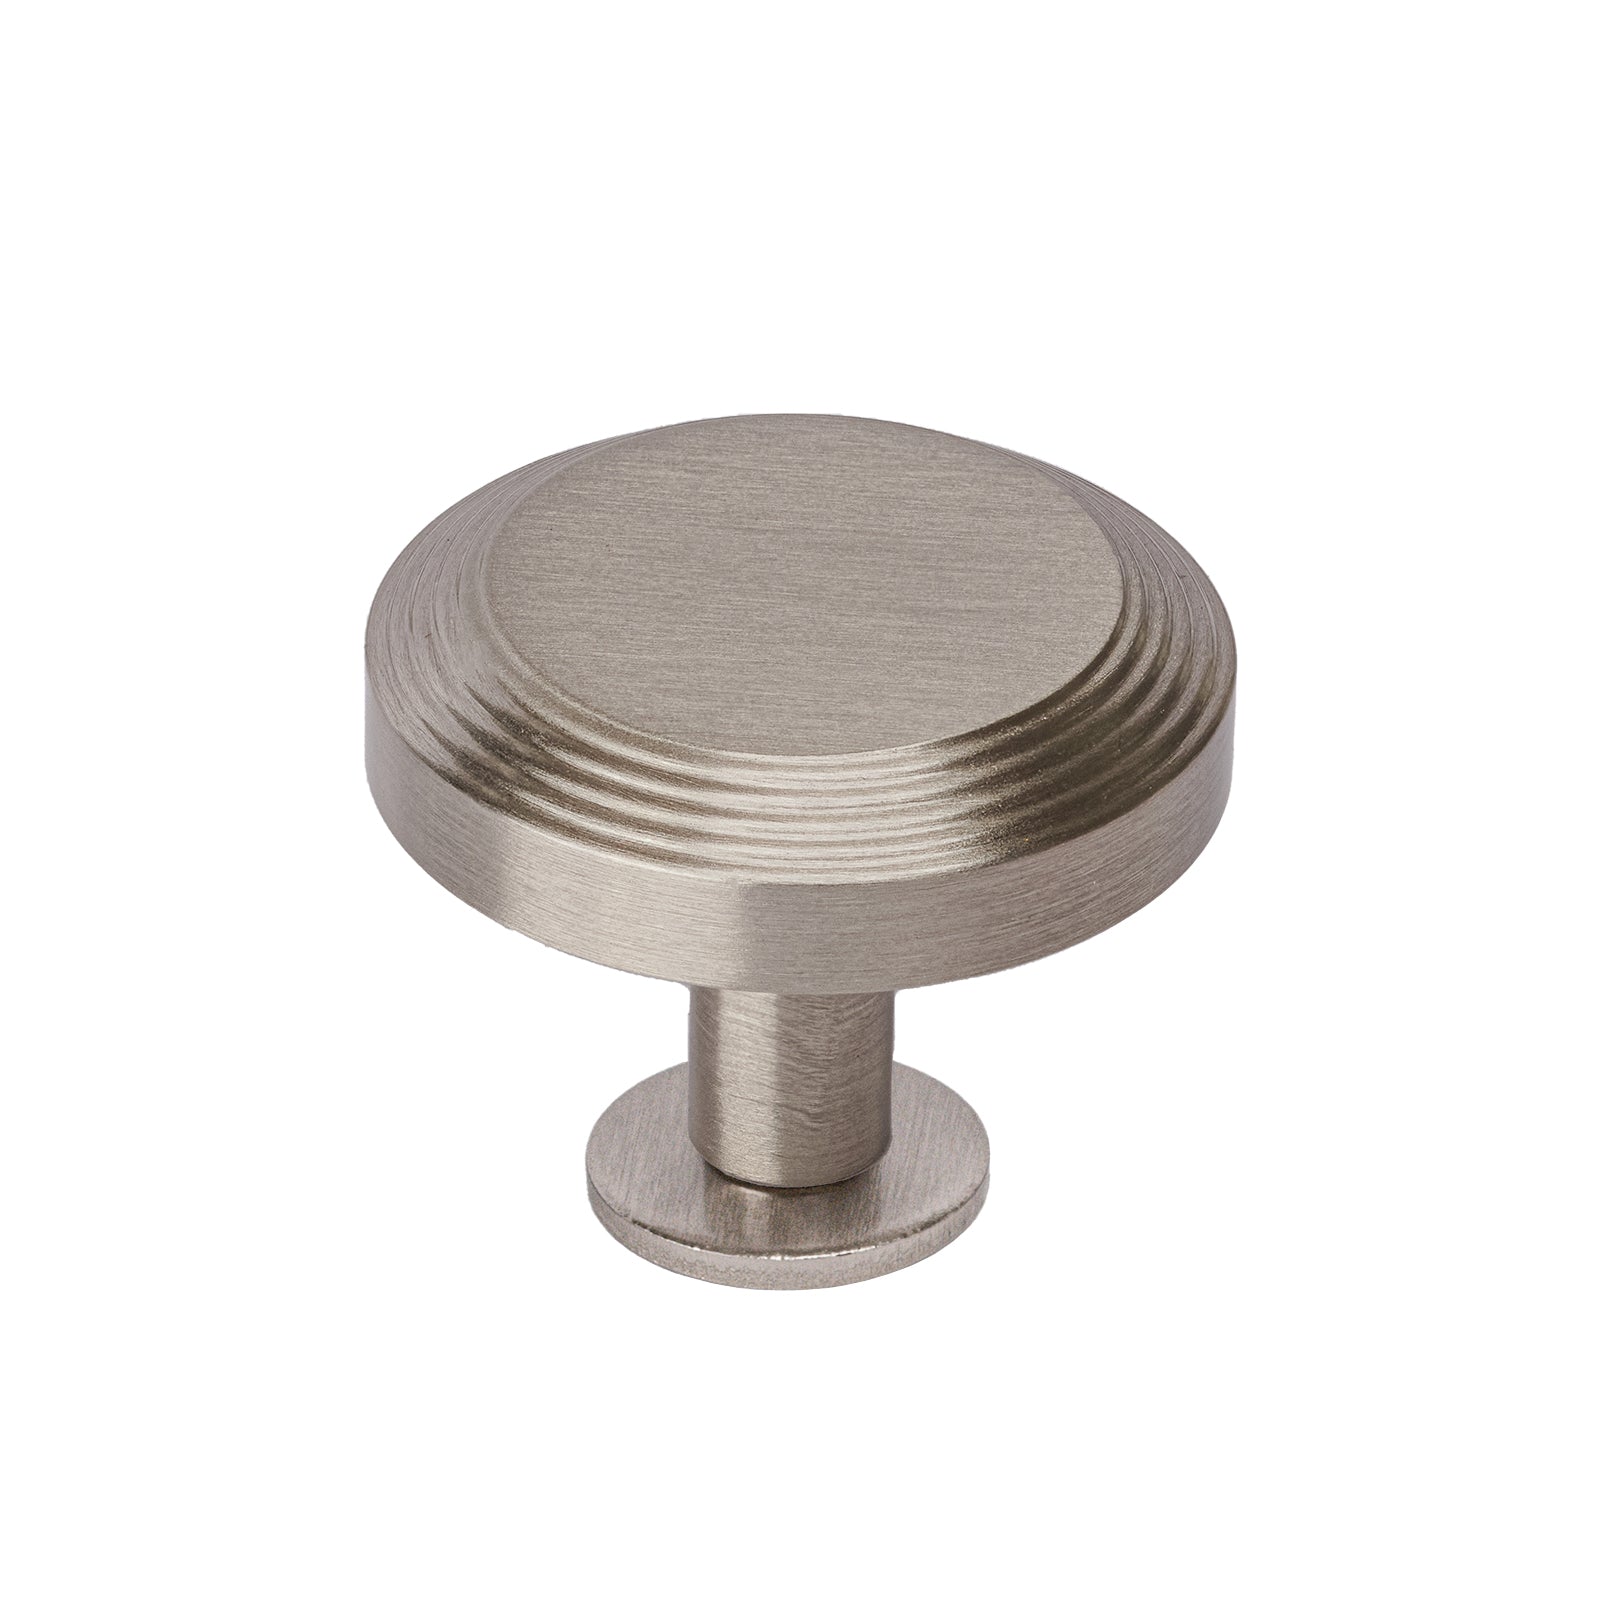 satin nickel kitchen cupboard knobs, traditional knobs on rose plate 